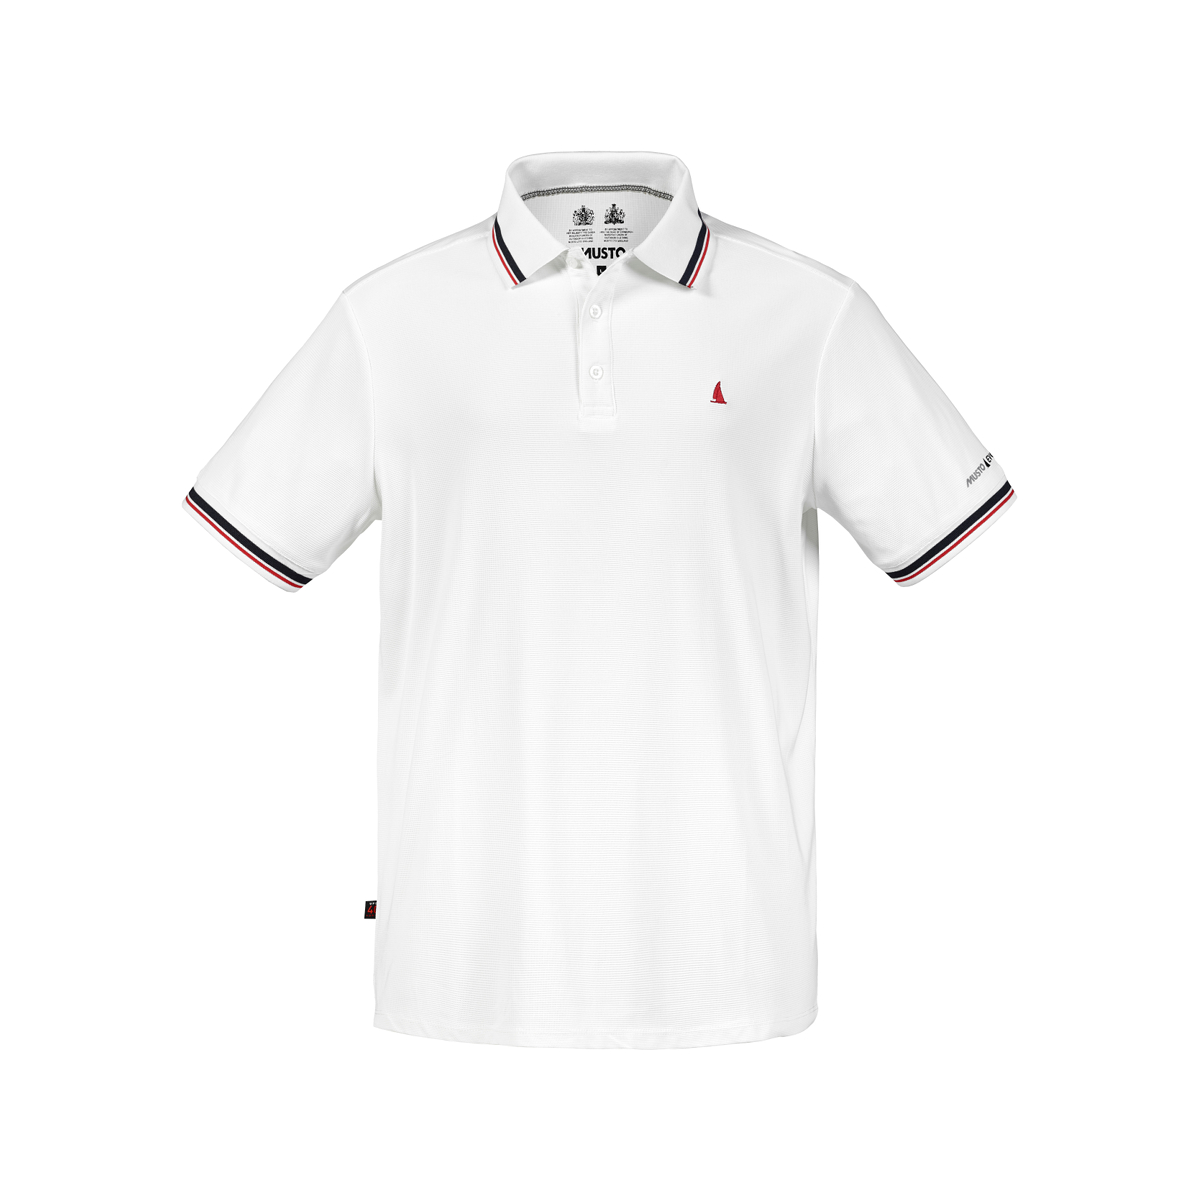 Musto Evolution Pro Lite polo homme blanc, taille XL